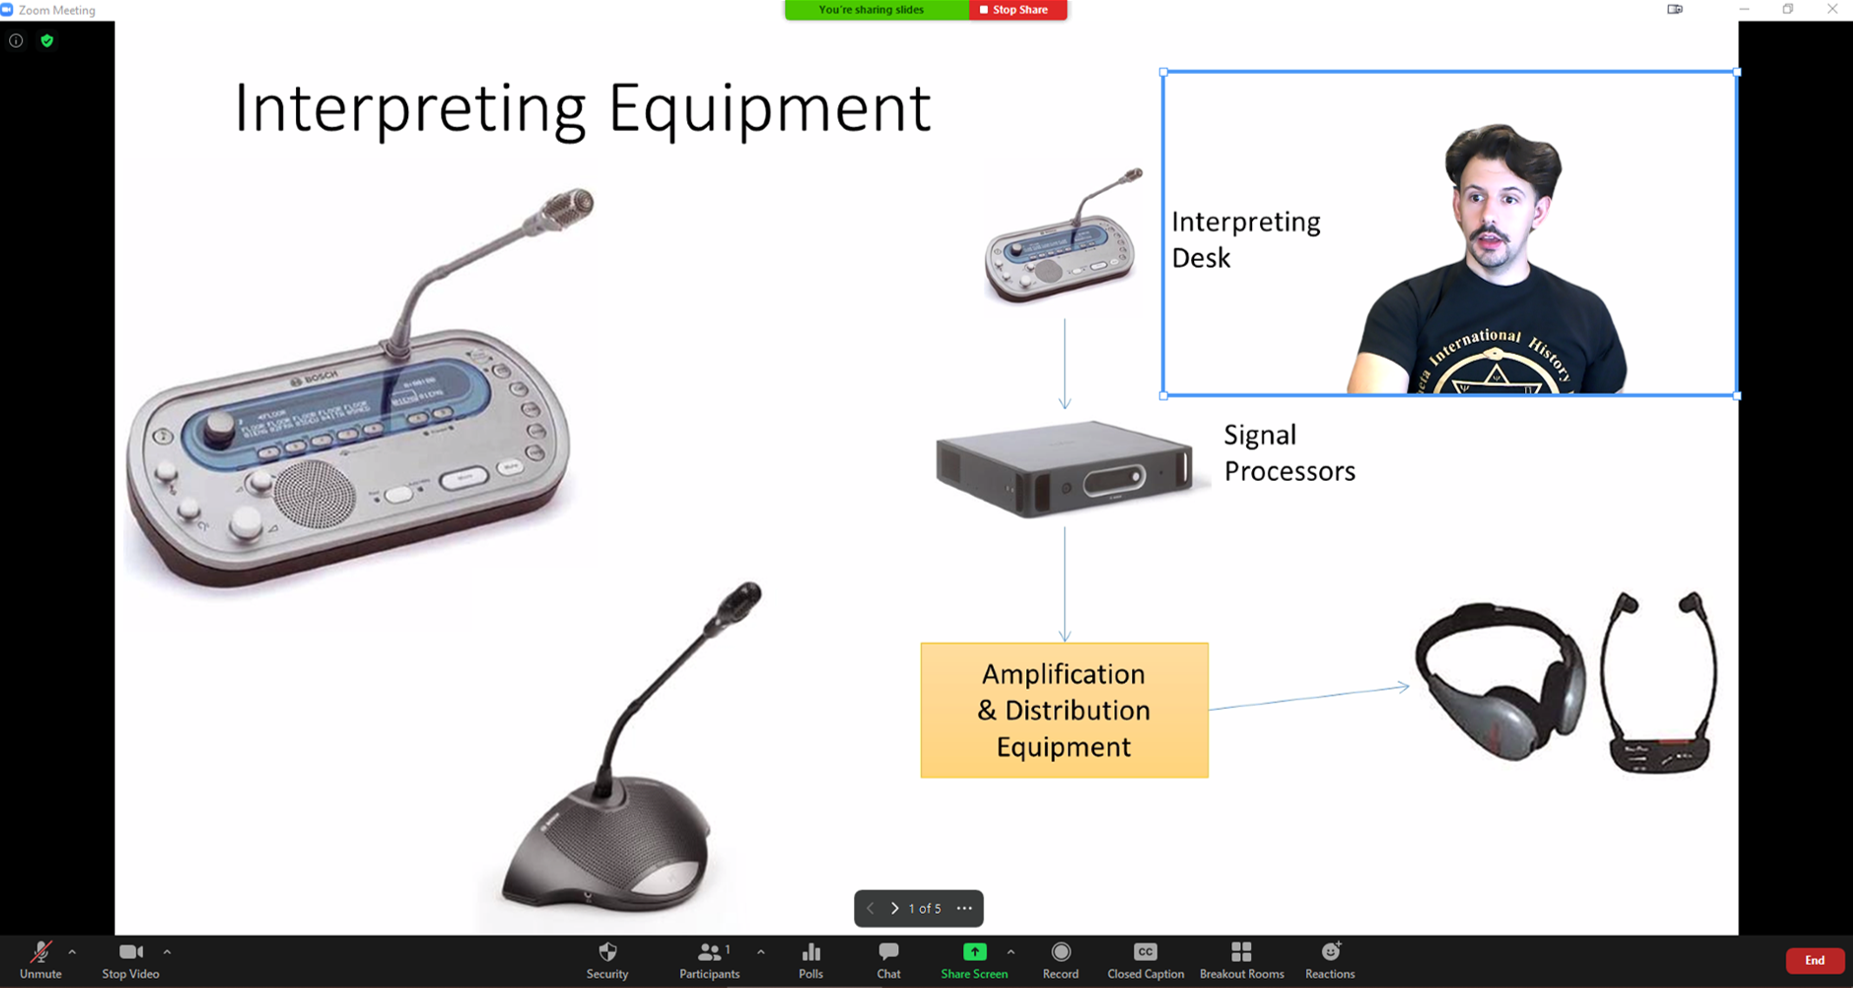 Example of using the feature on a powerpoint slide